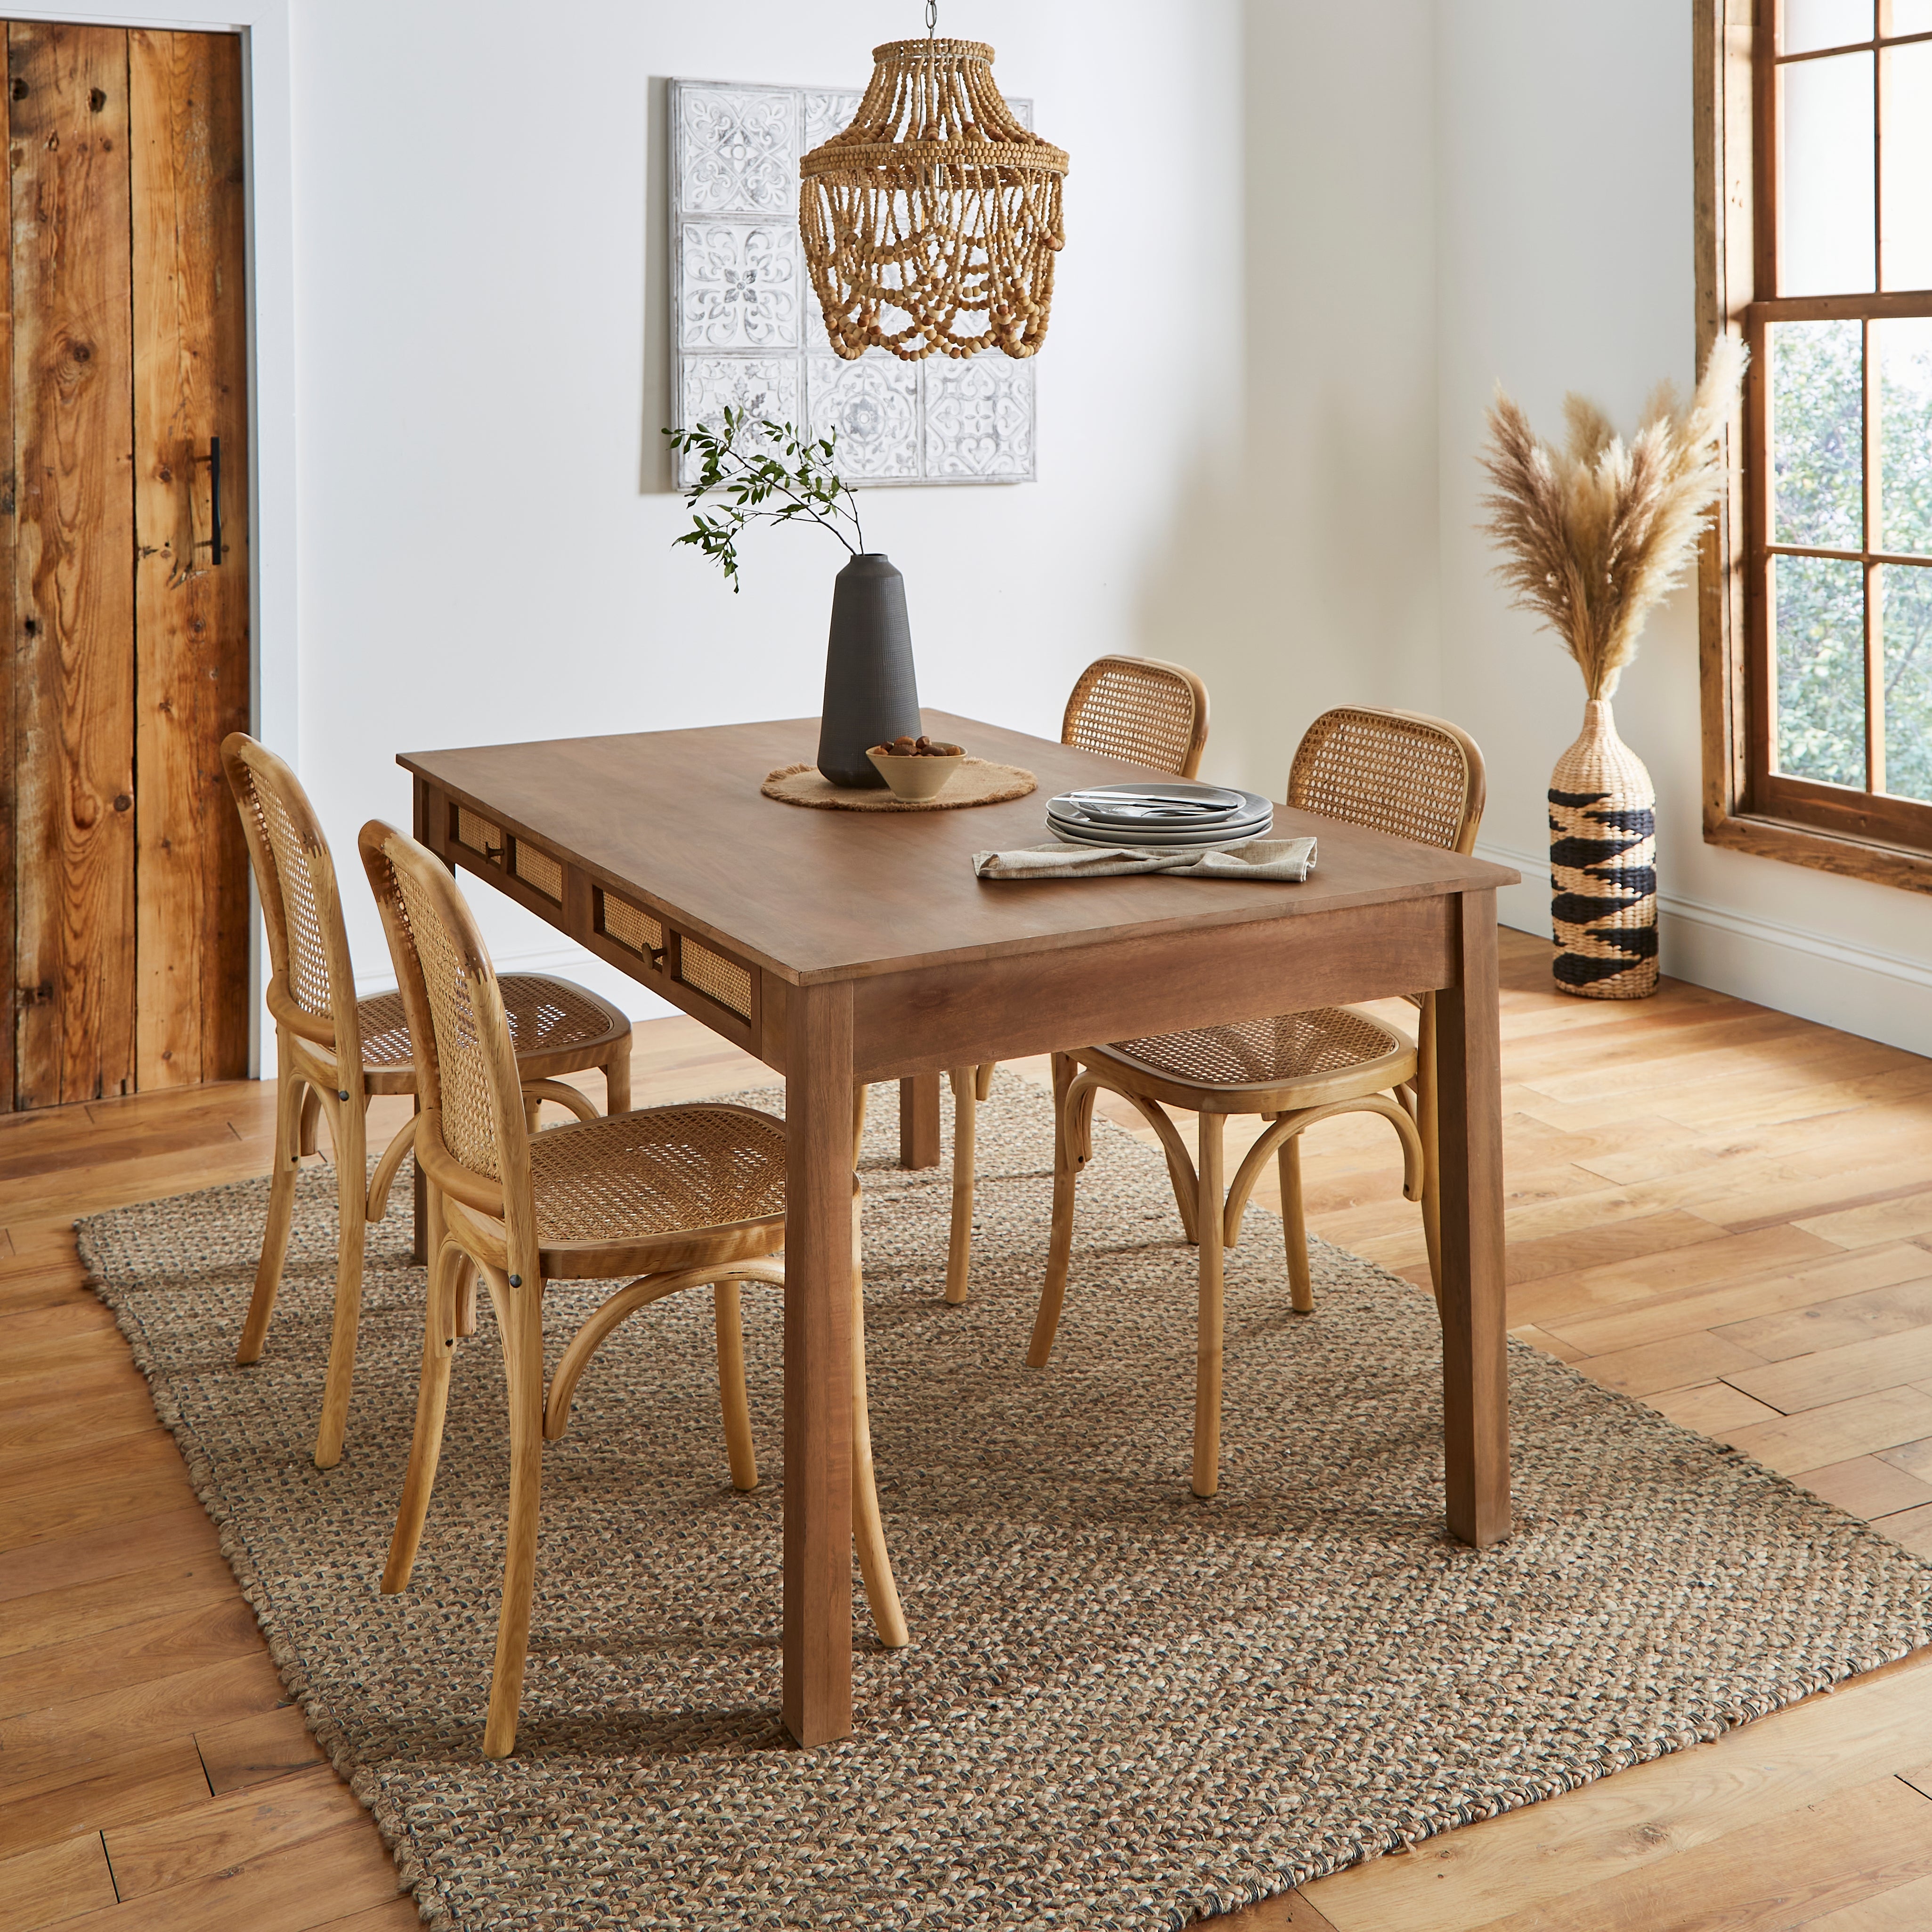 Indi Mango Wood Dining Table with Tulle Dining Chairs Natural